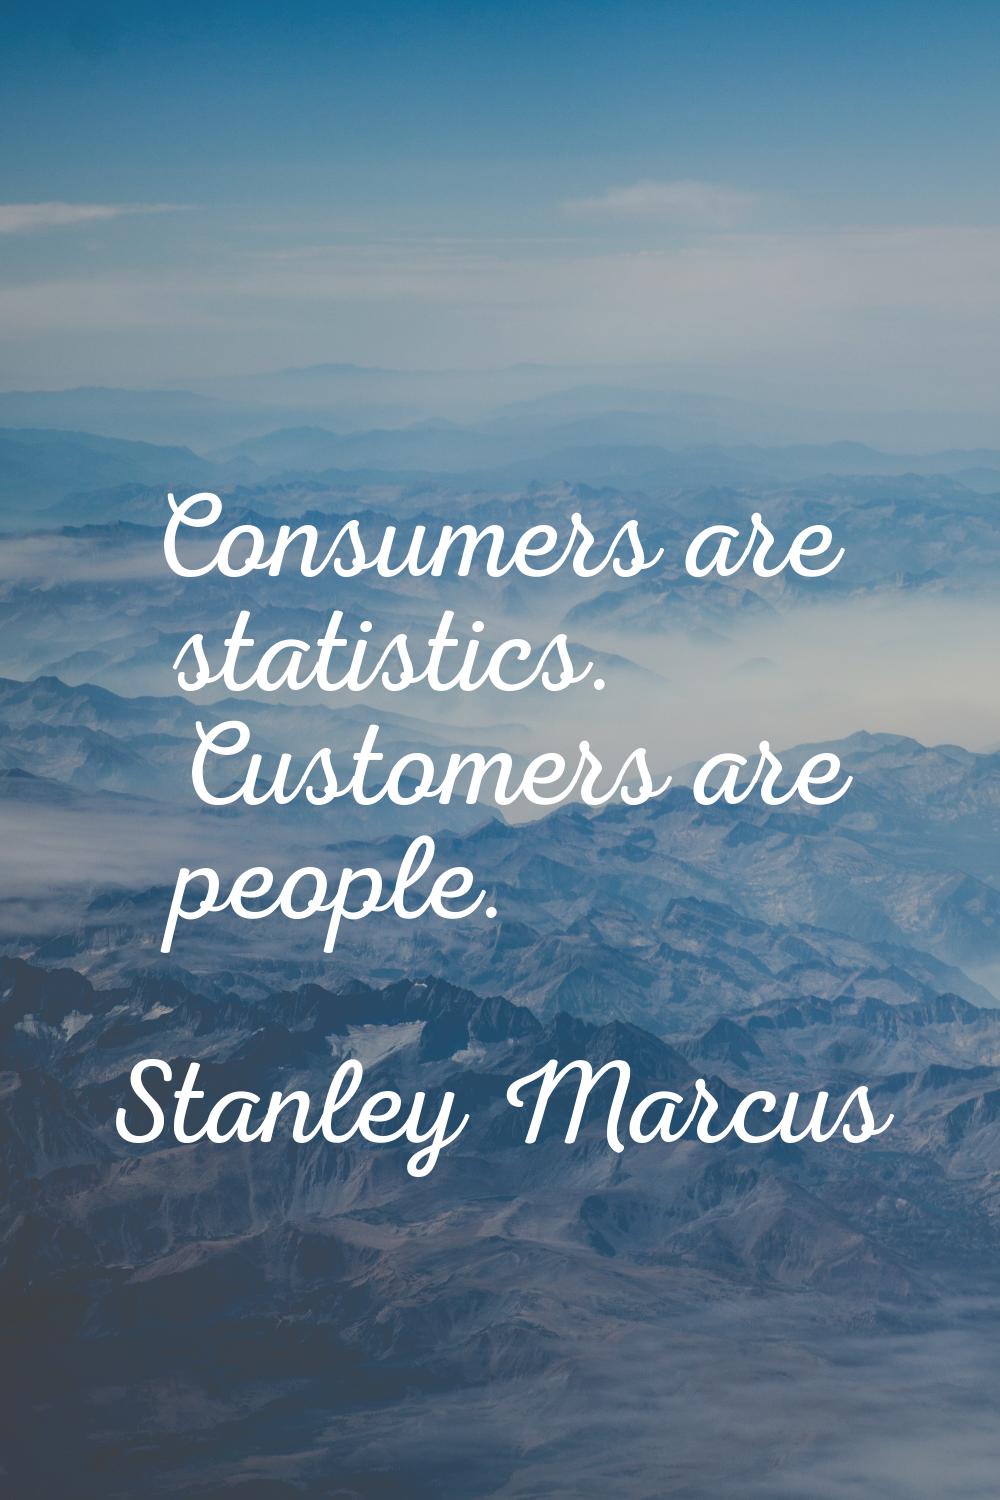 Consumers are statistics. Customers are people.